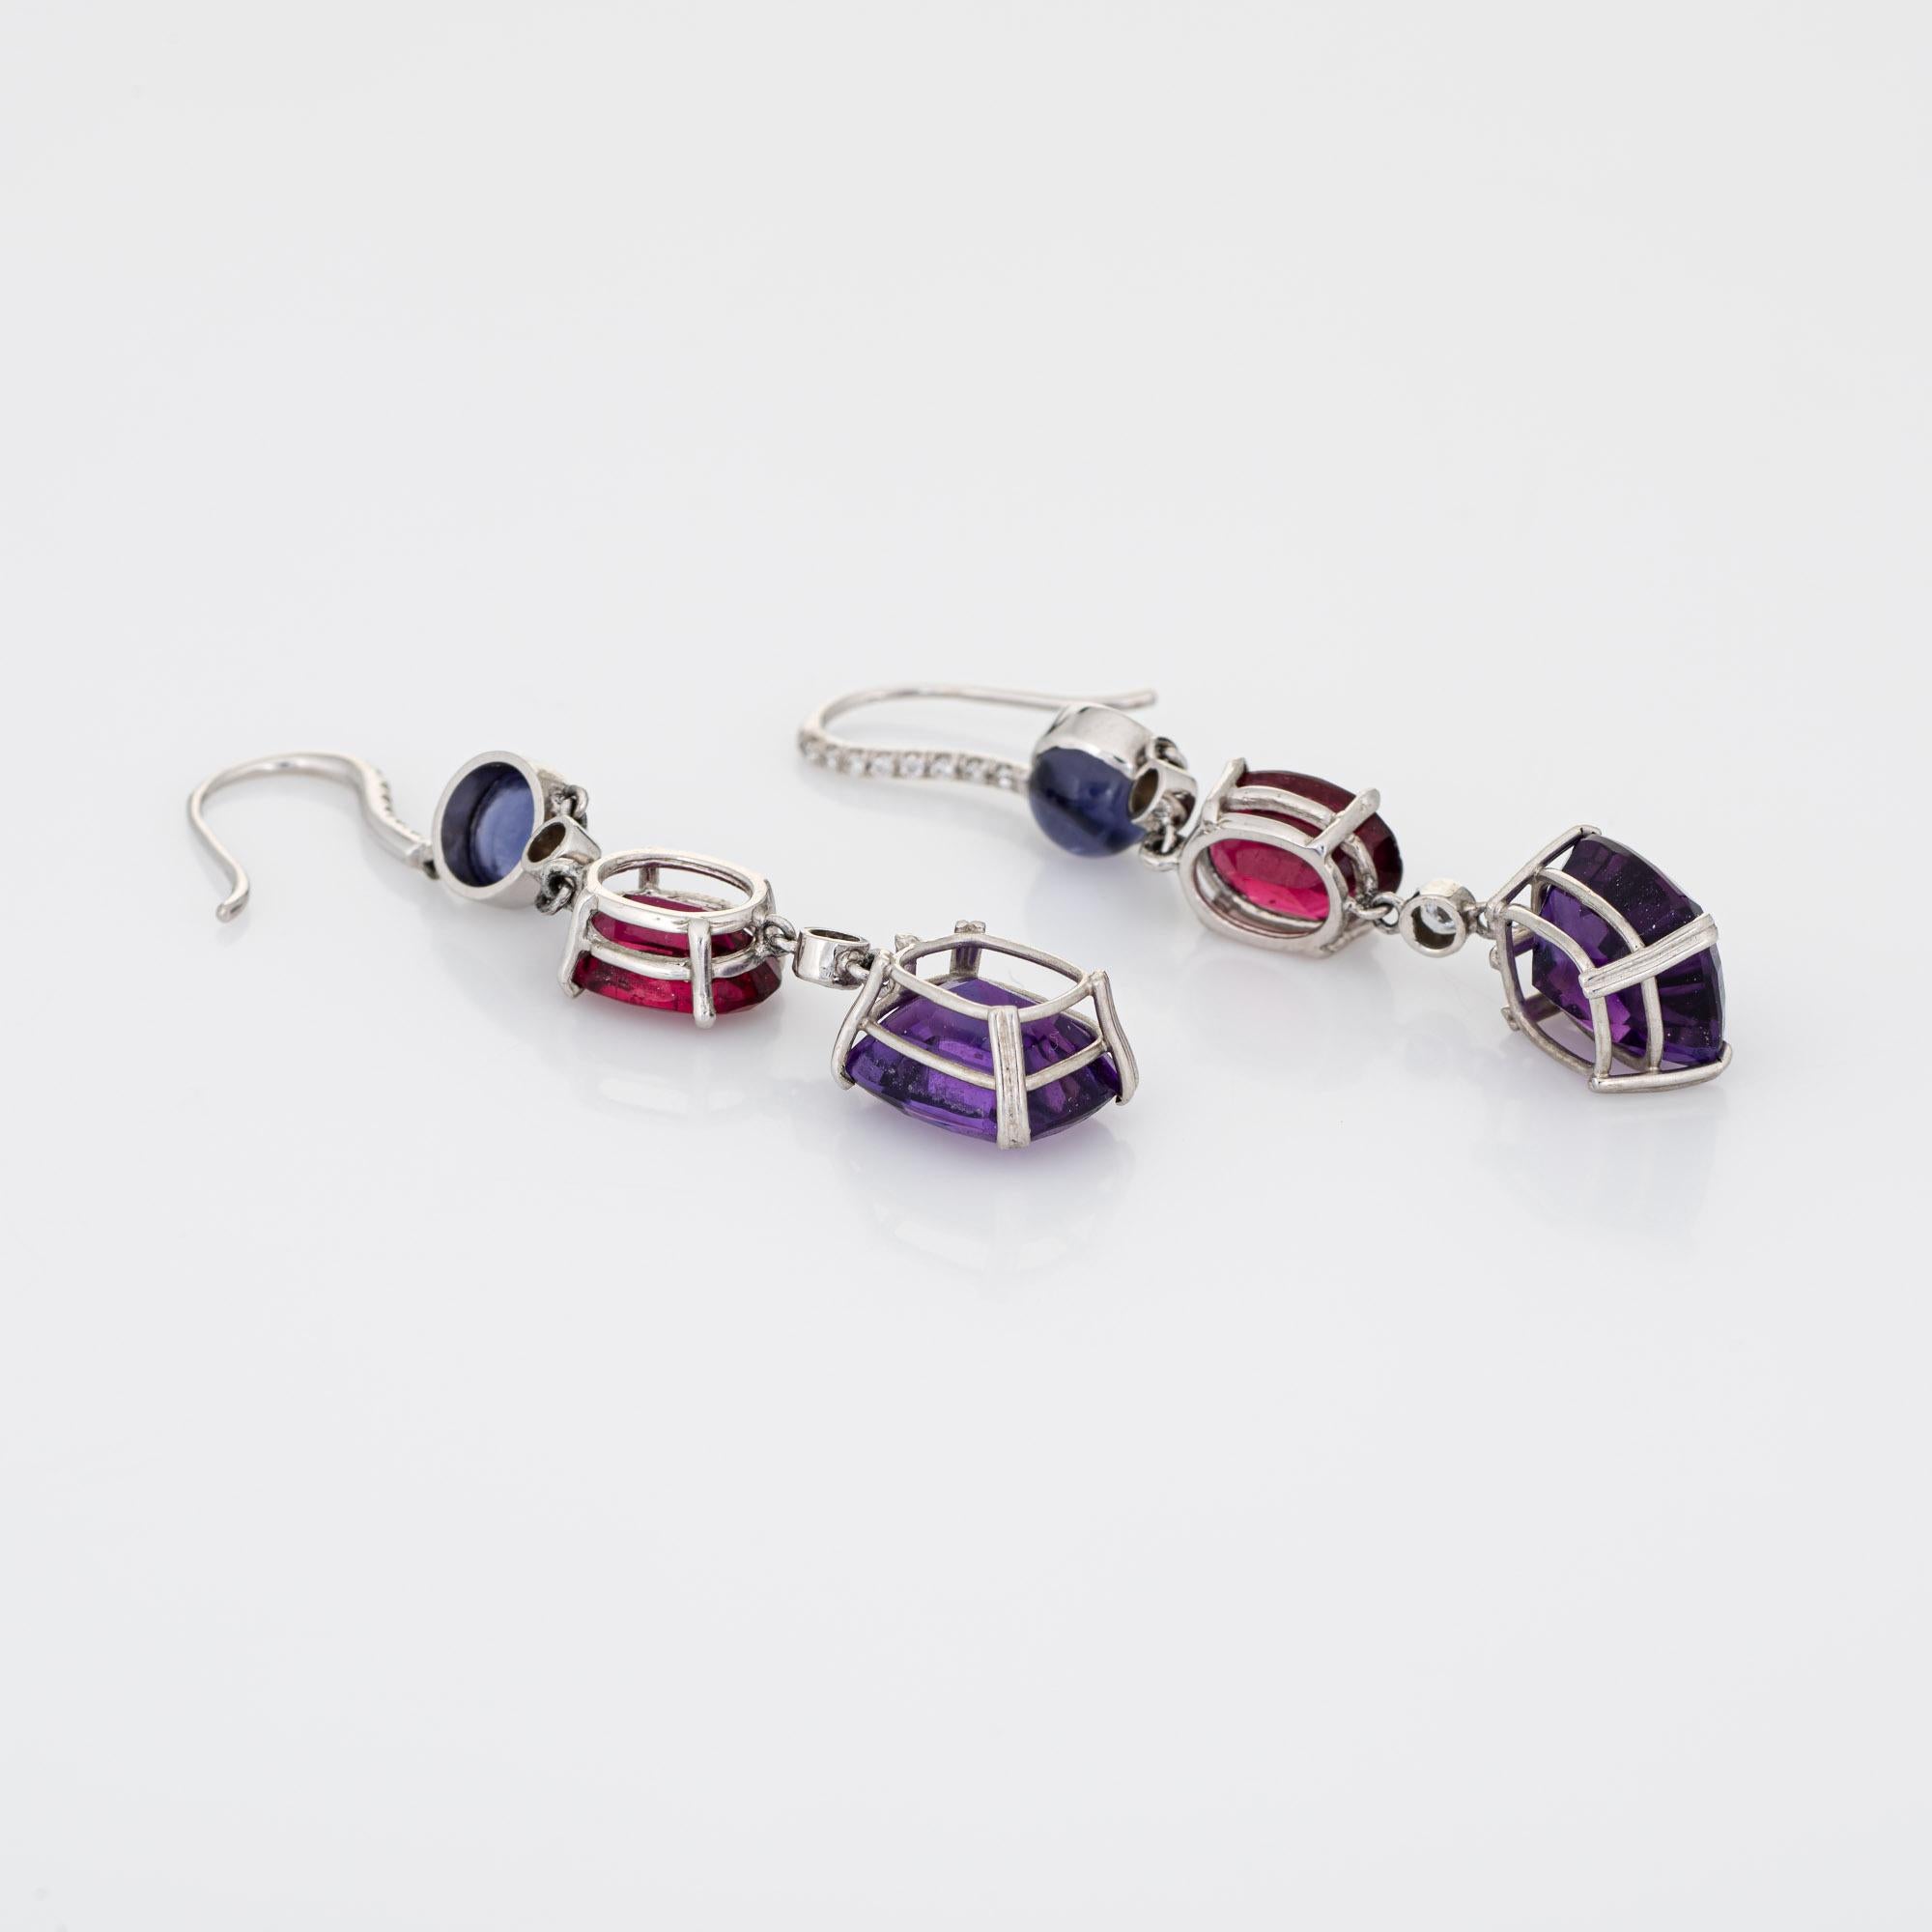 Stylish pair of amethyst, iolite and rhodolite garnet & diamond earrings crafted in 18k white gold. 

Two amethysts measure 10.5mm x 9mm (estimated at 3.75 carats each - 7.50 carats total estimated weight), two rhodolite garnets measure 9.5mm x 7mm